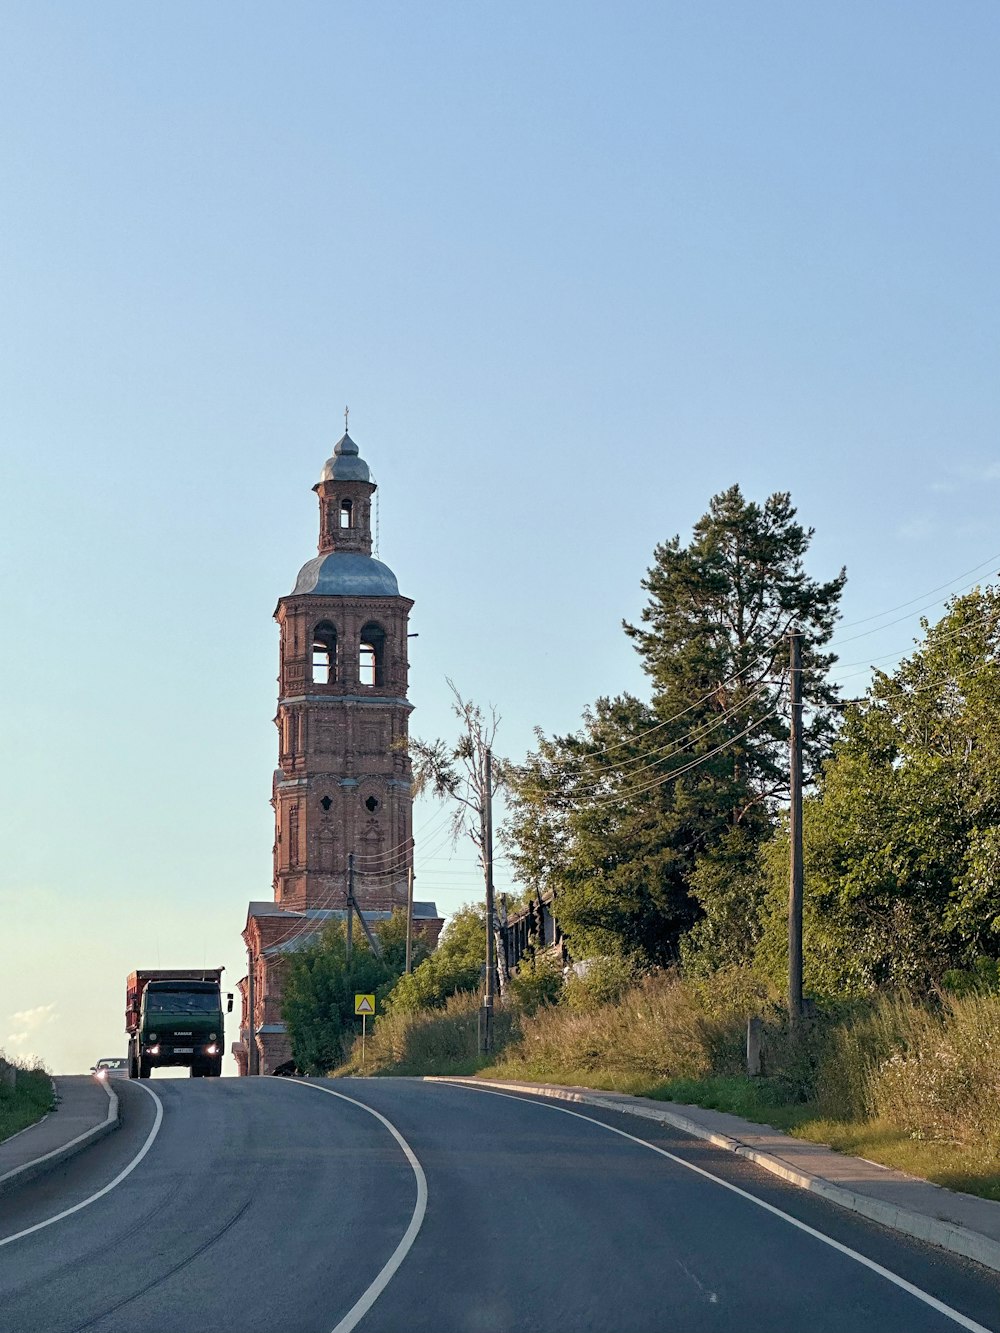 a truck driving down a road next to a tall tower